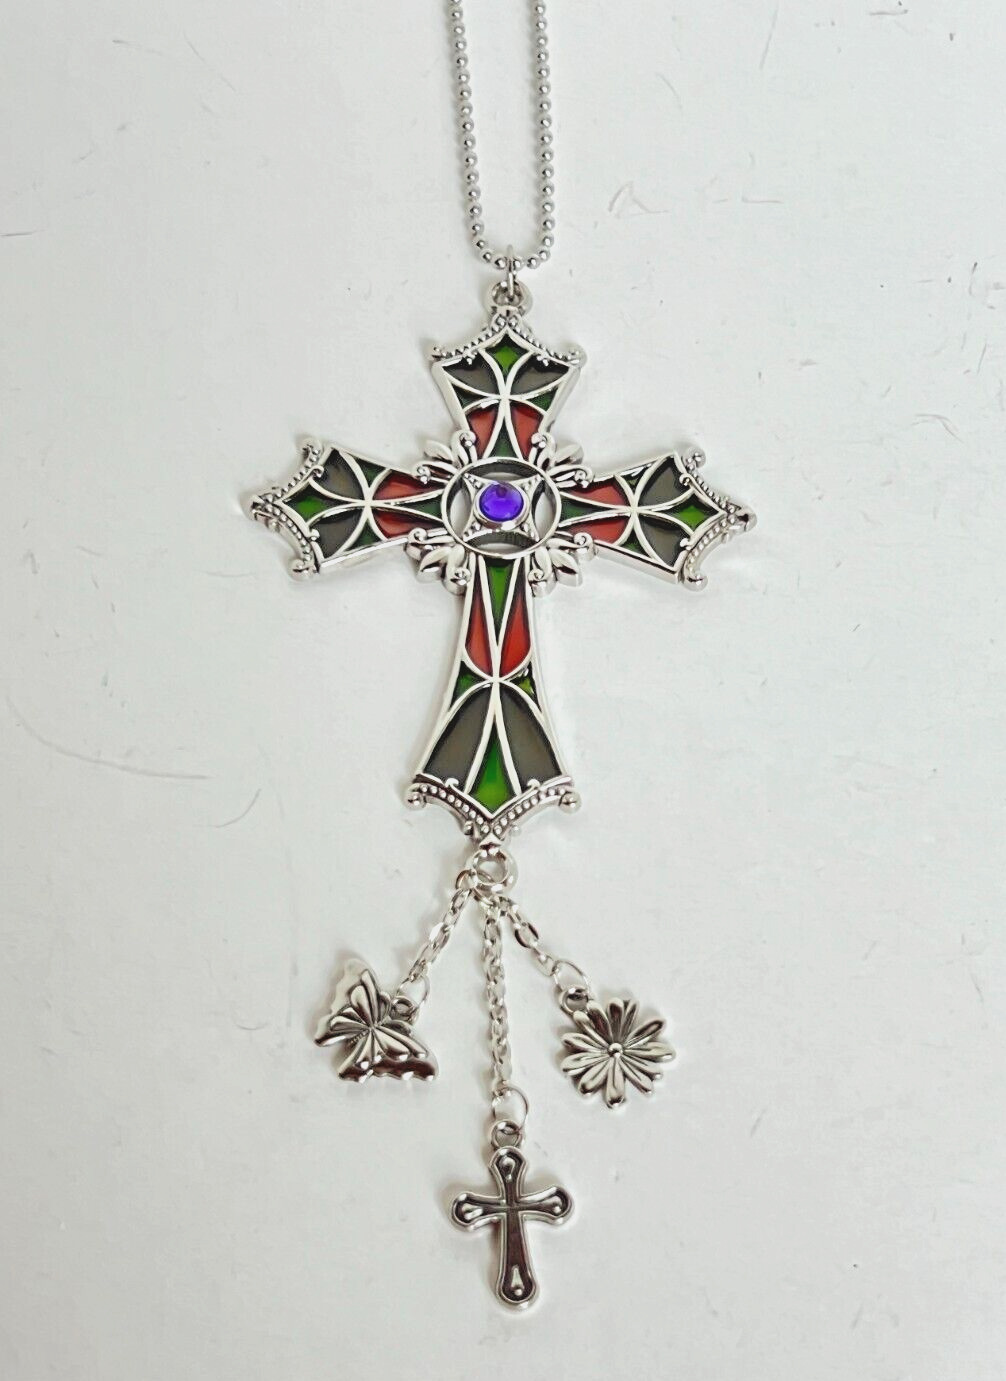 Ganz Stain Glass Look CROSS Car Charm Ornament w/3 Dangle charms Pink/Blue/Green